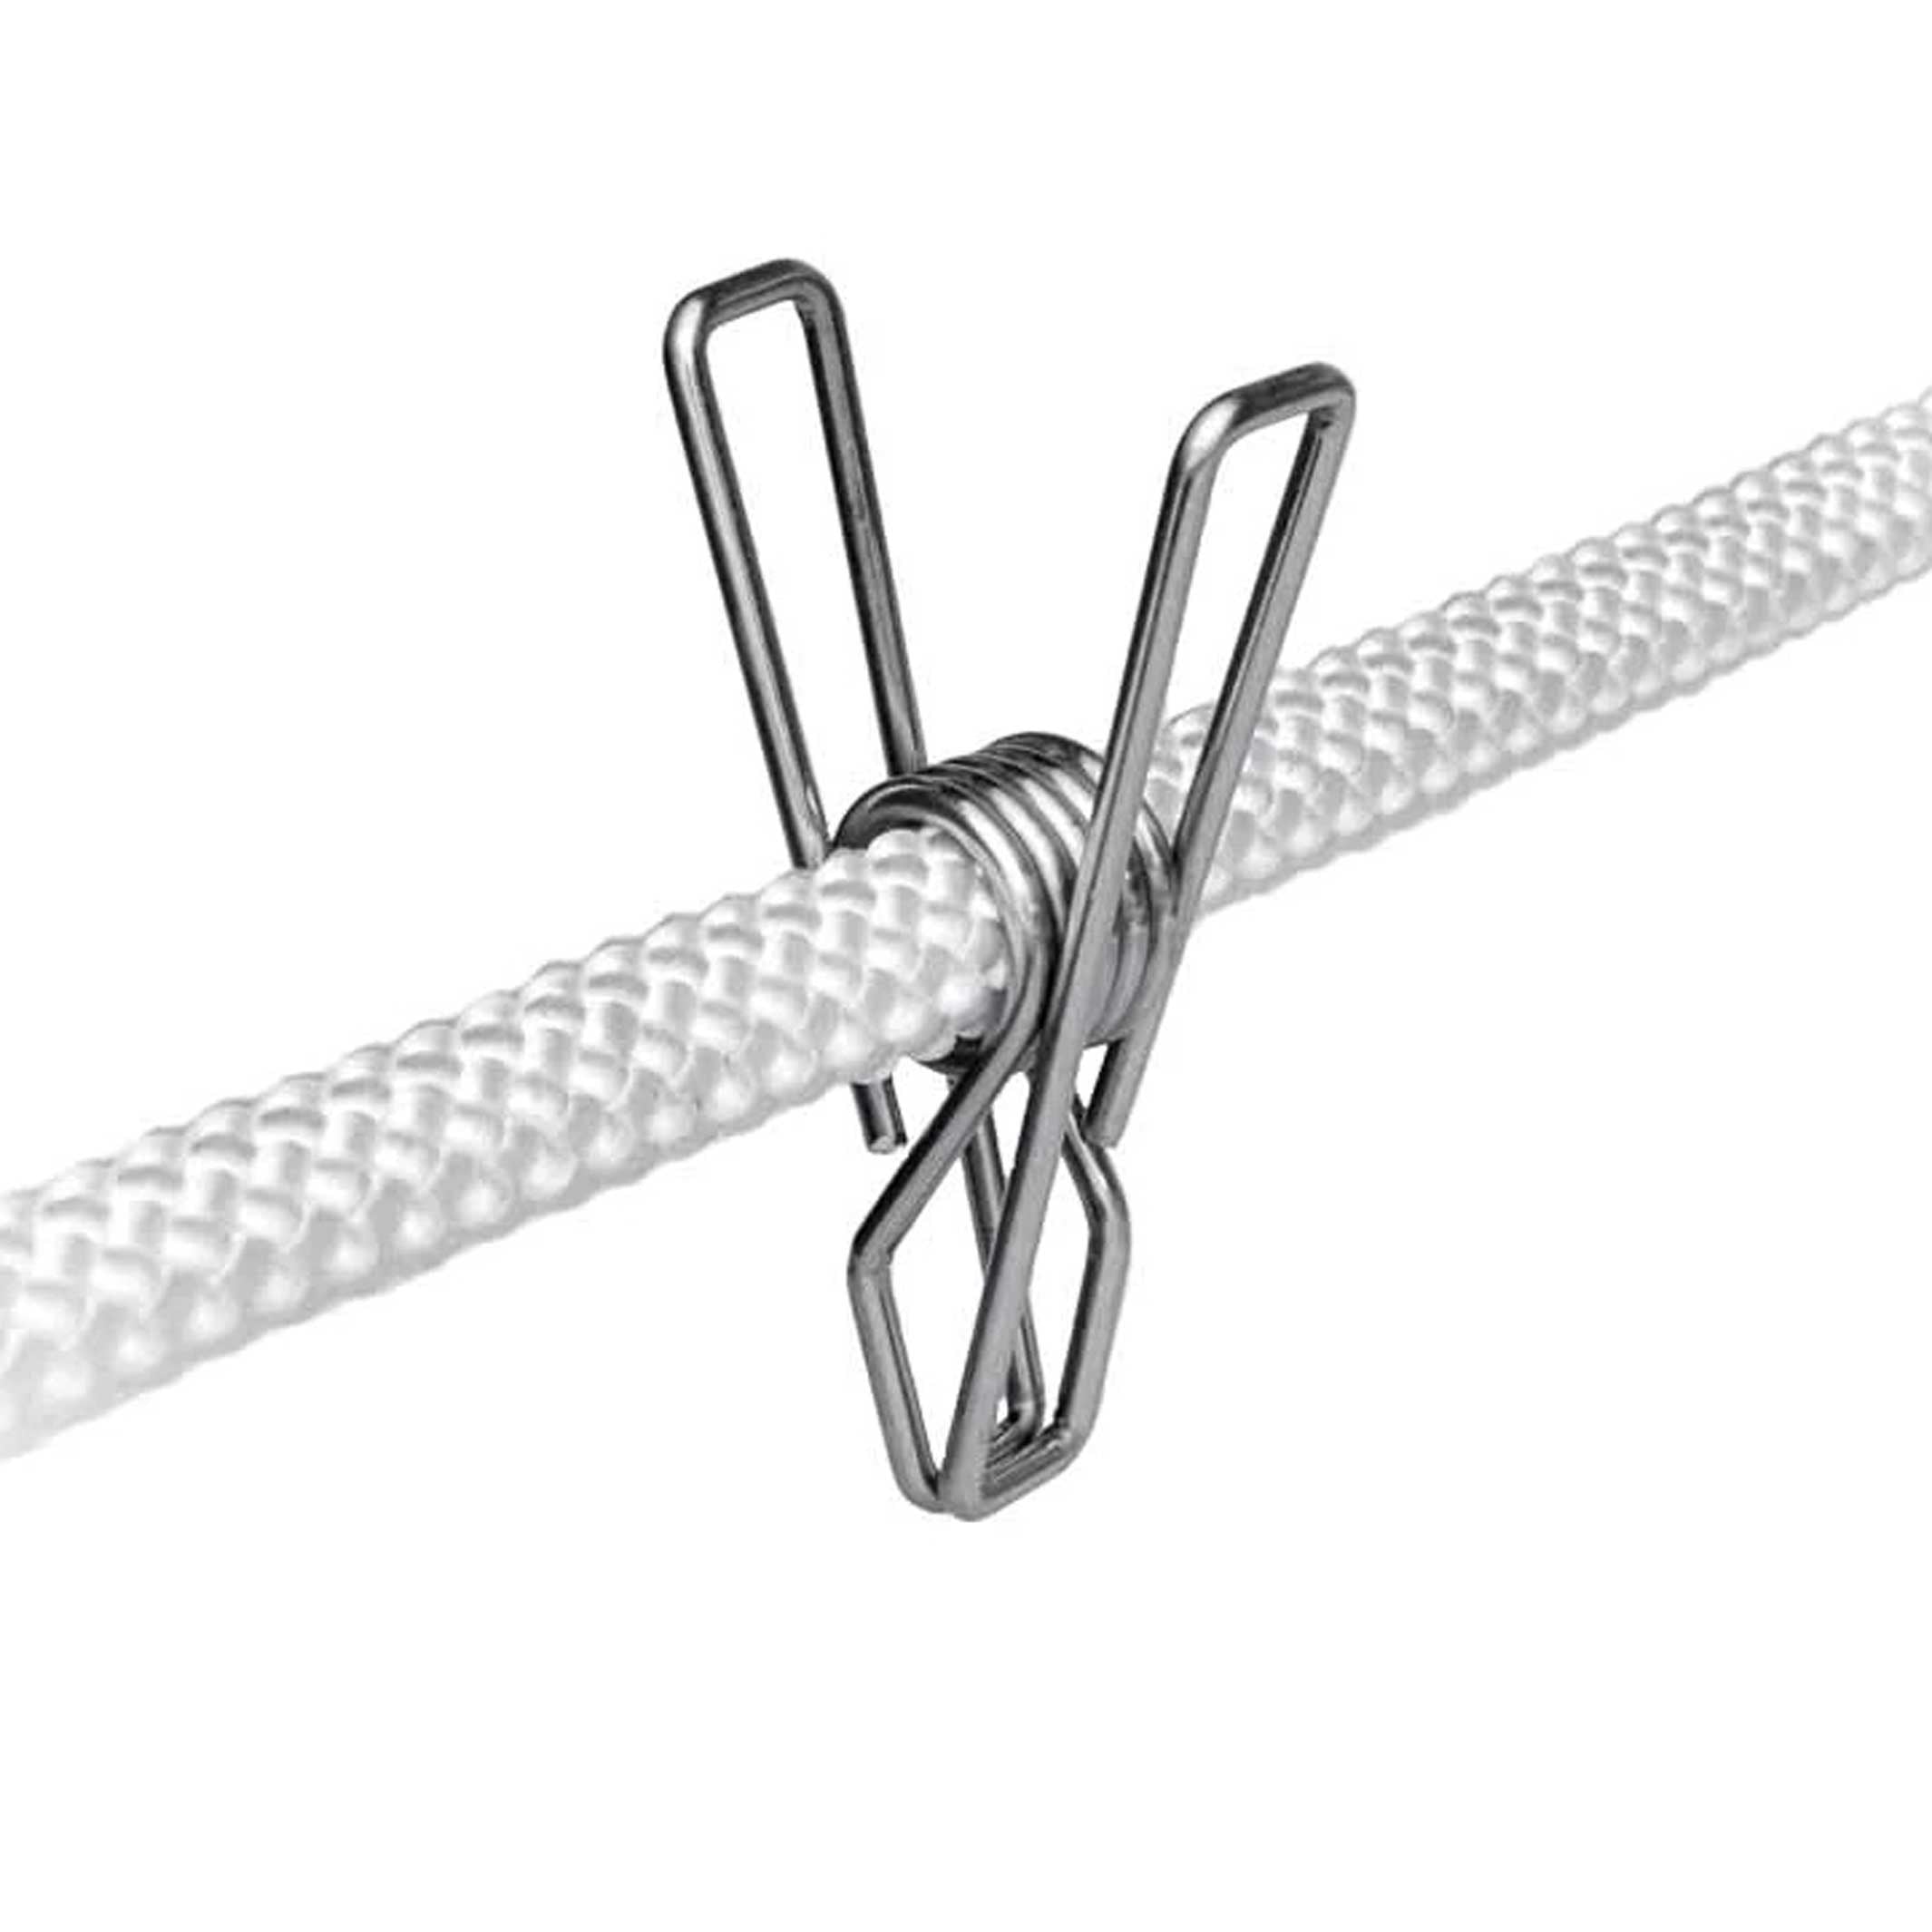 ROPE CLIPS, Extend function of your Hangers, Wardrobes & S-Hooks